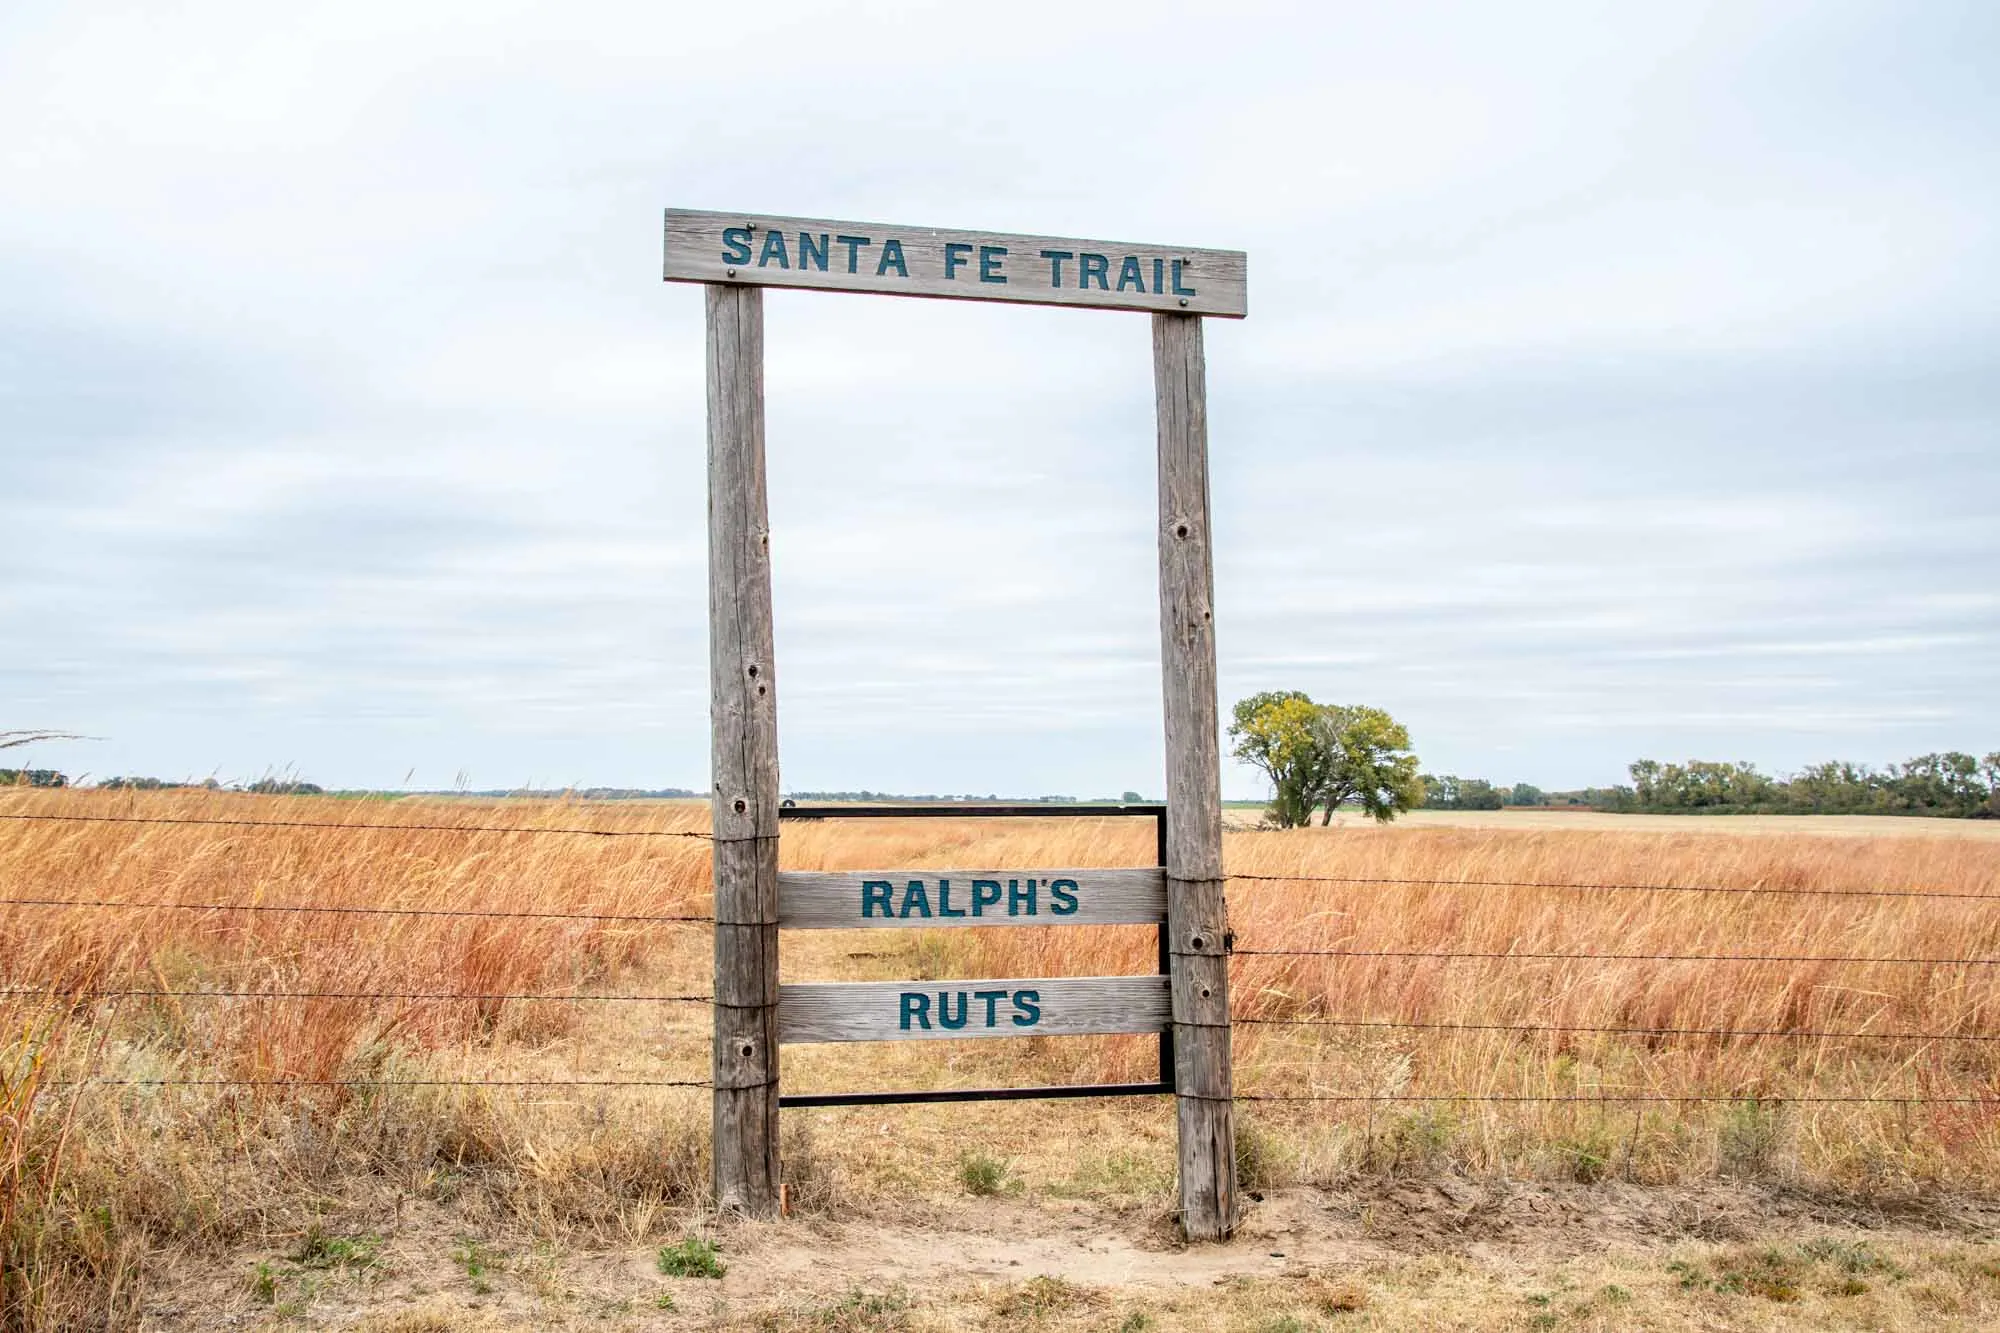 Gate on to private property. The sign reads "Santa Fe Trail Ralphy's Ruts"